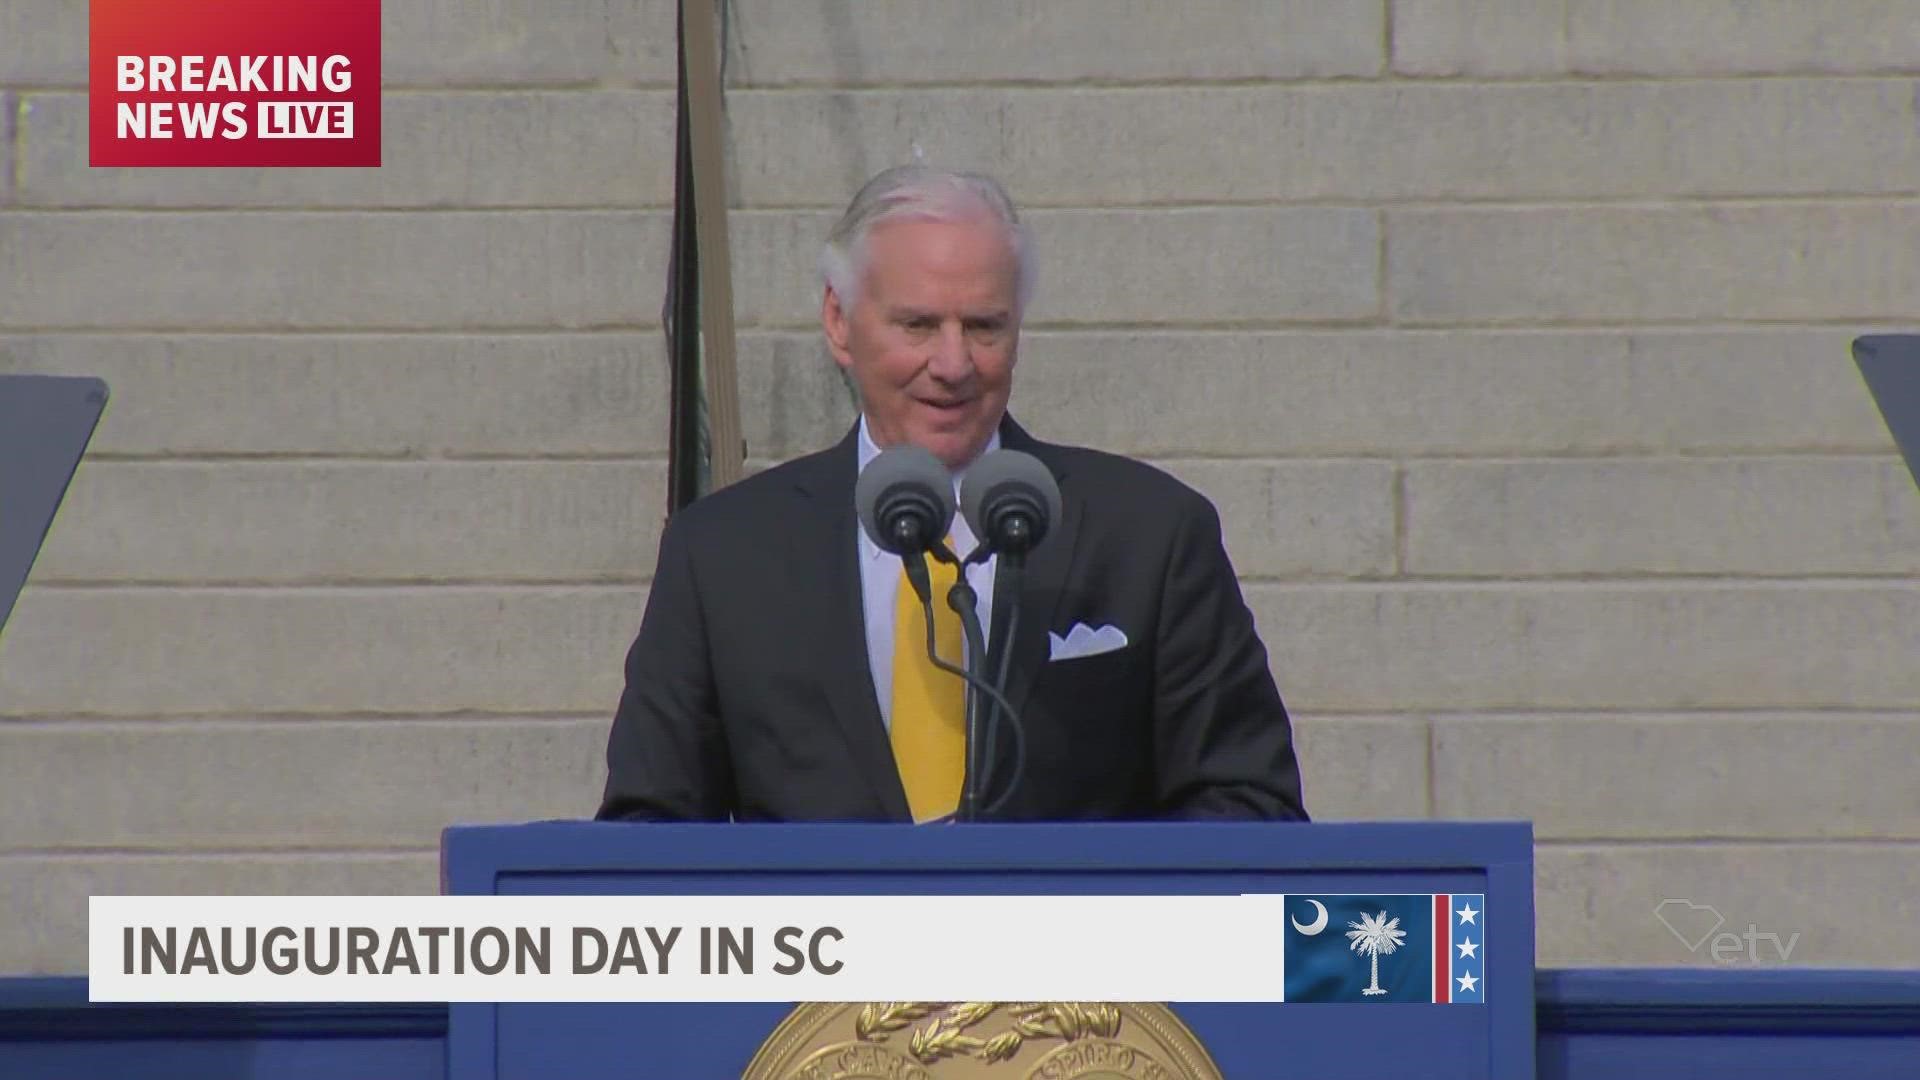 South Carolina Gov. Henry McMaster was sworn in to another term in office on January 11, 2023.